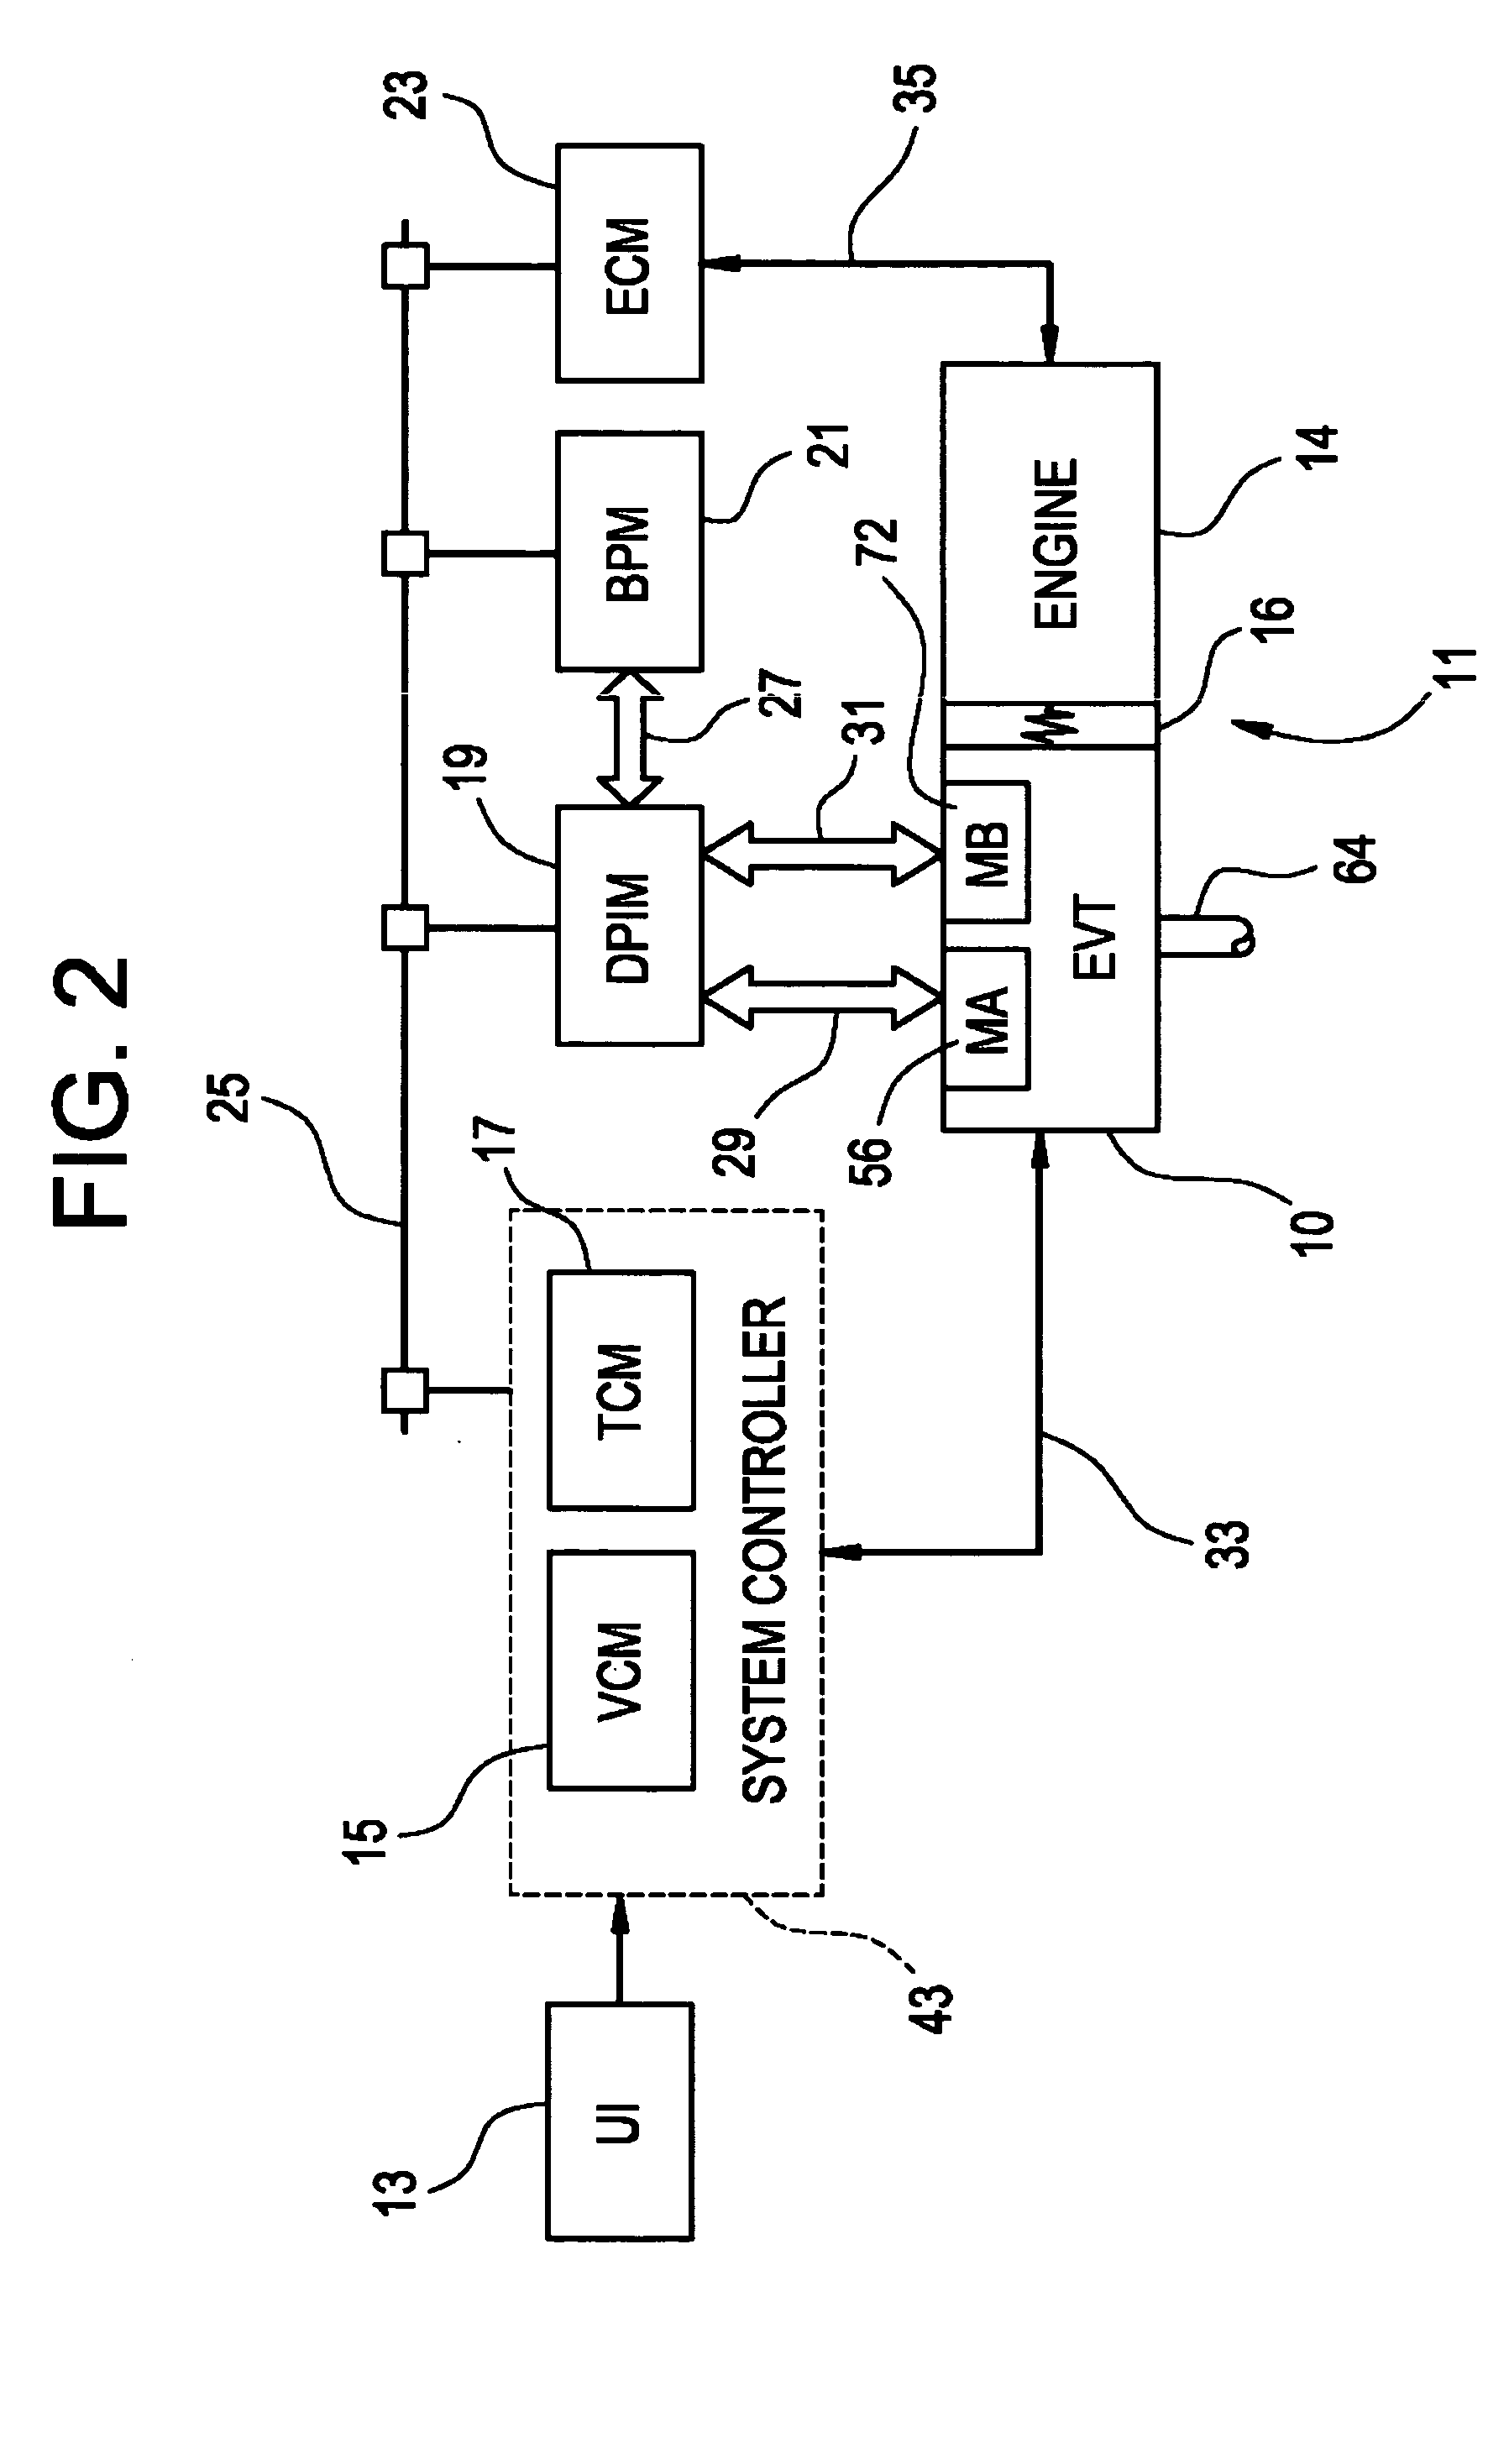 Control apparatus, method and diagnostic for hydraulic fill and drain